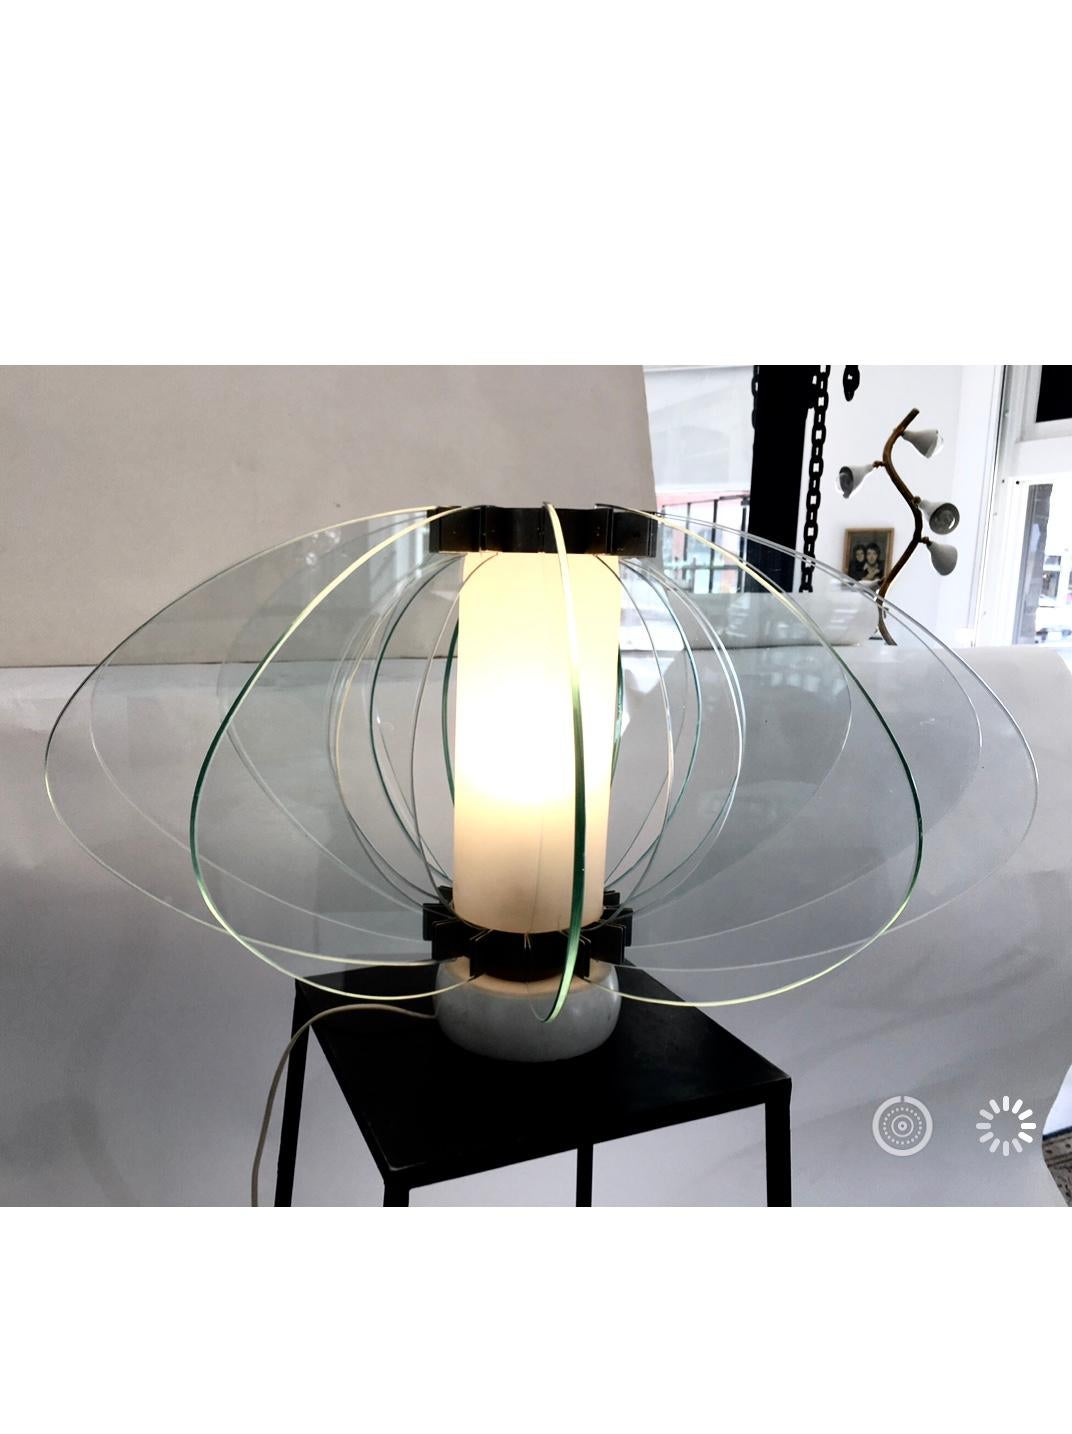 Beautiful table lamp by Reggiani, with 6 inch round marble base and 1/4 inch thick glass. Italy, 1960s.